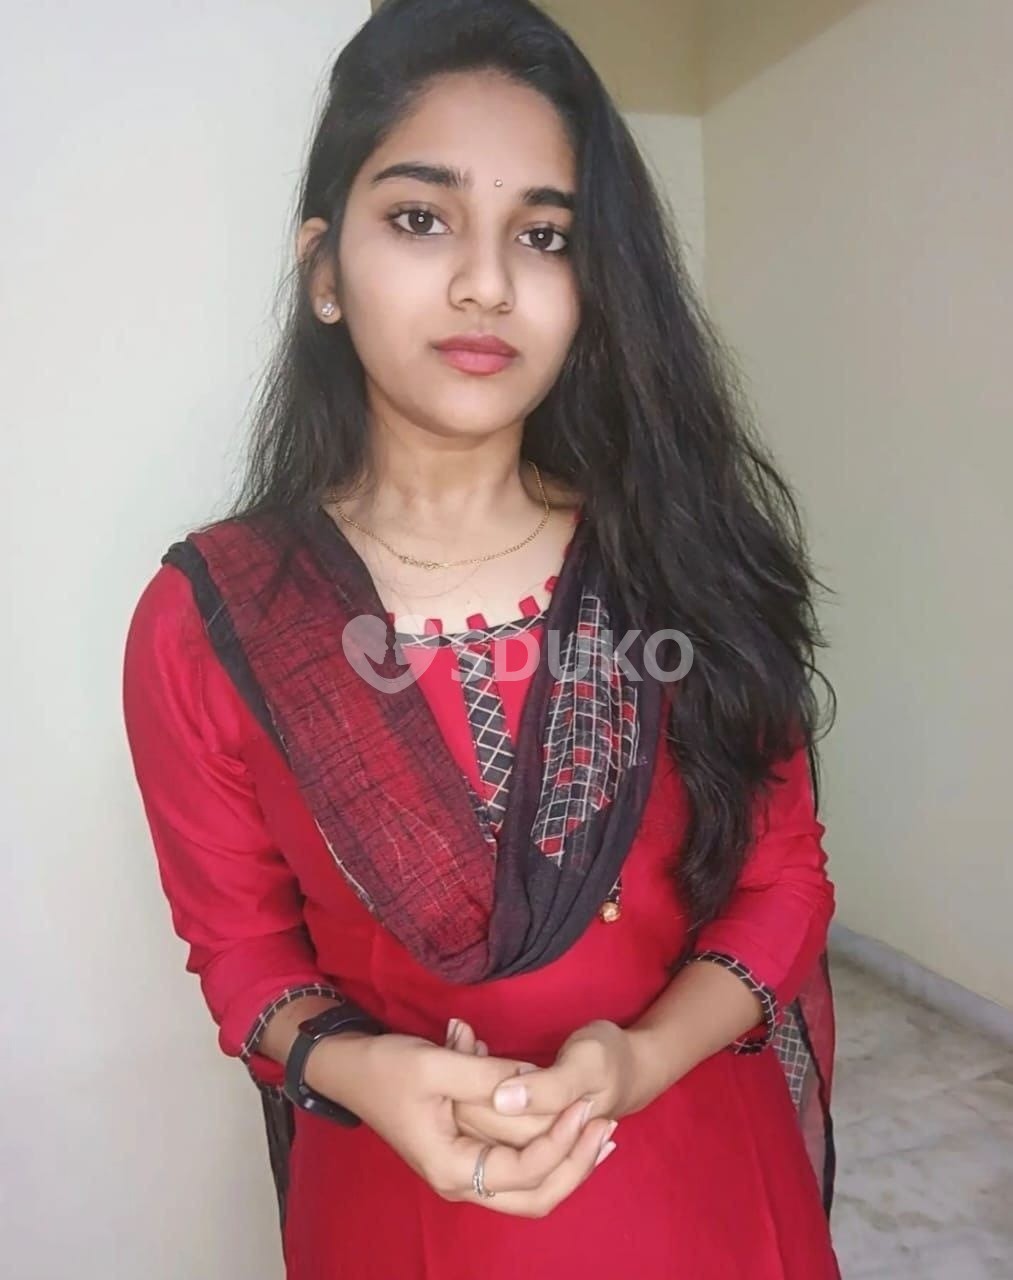 Eluru 77373//69894 full safe high profile good looking girls low price available